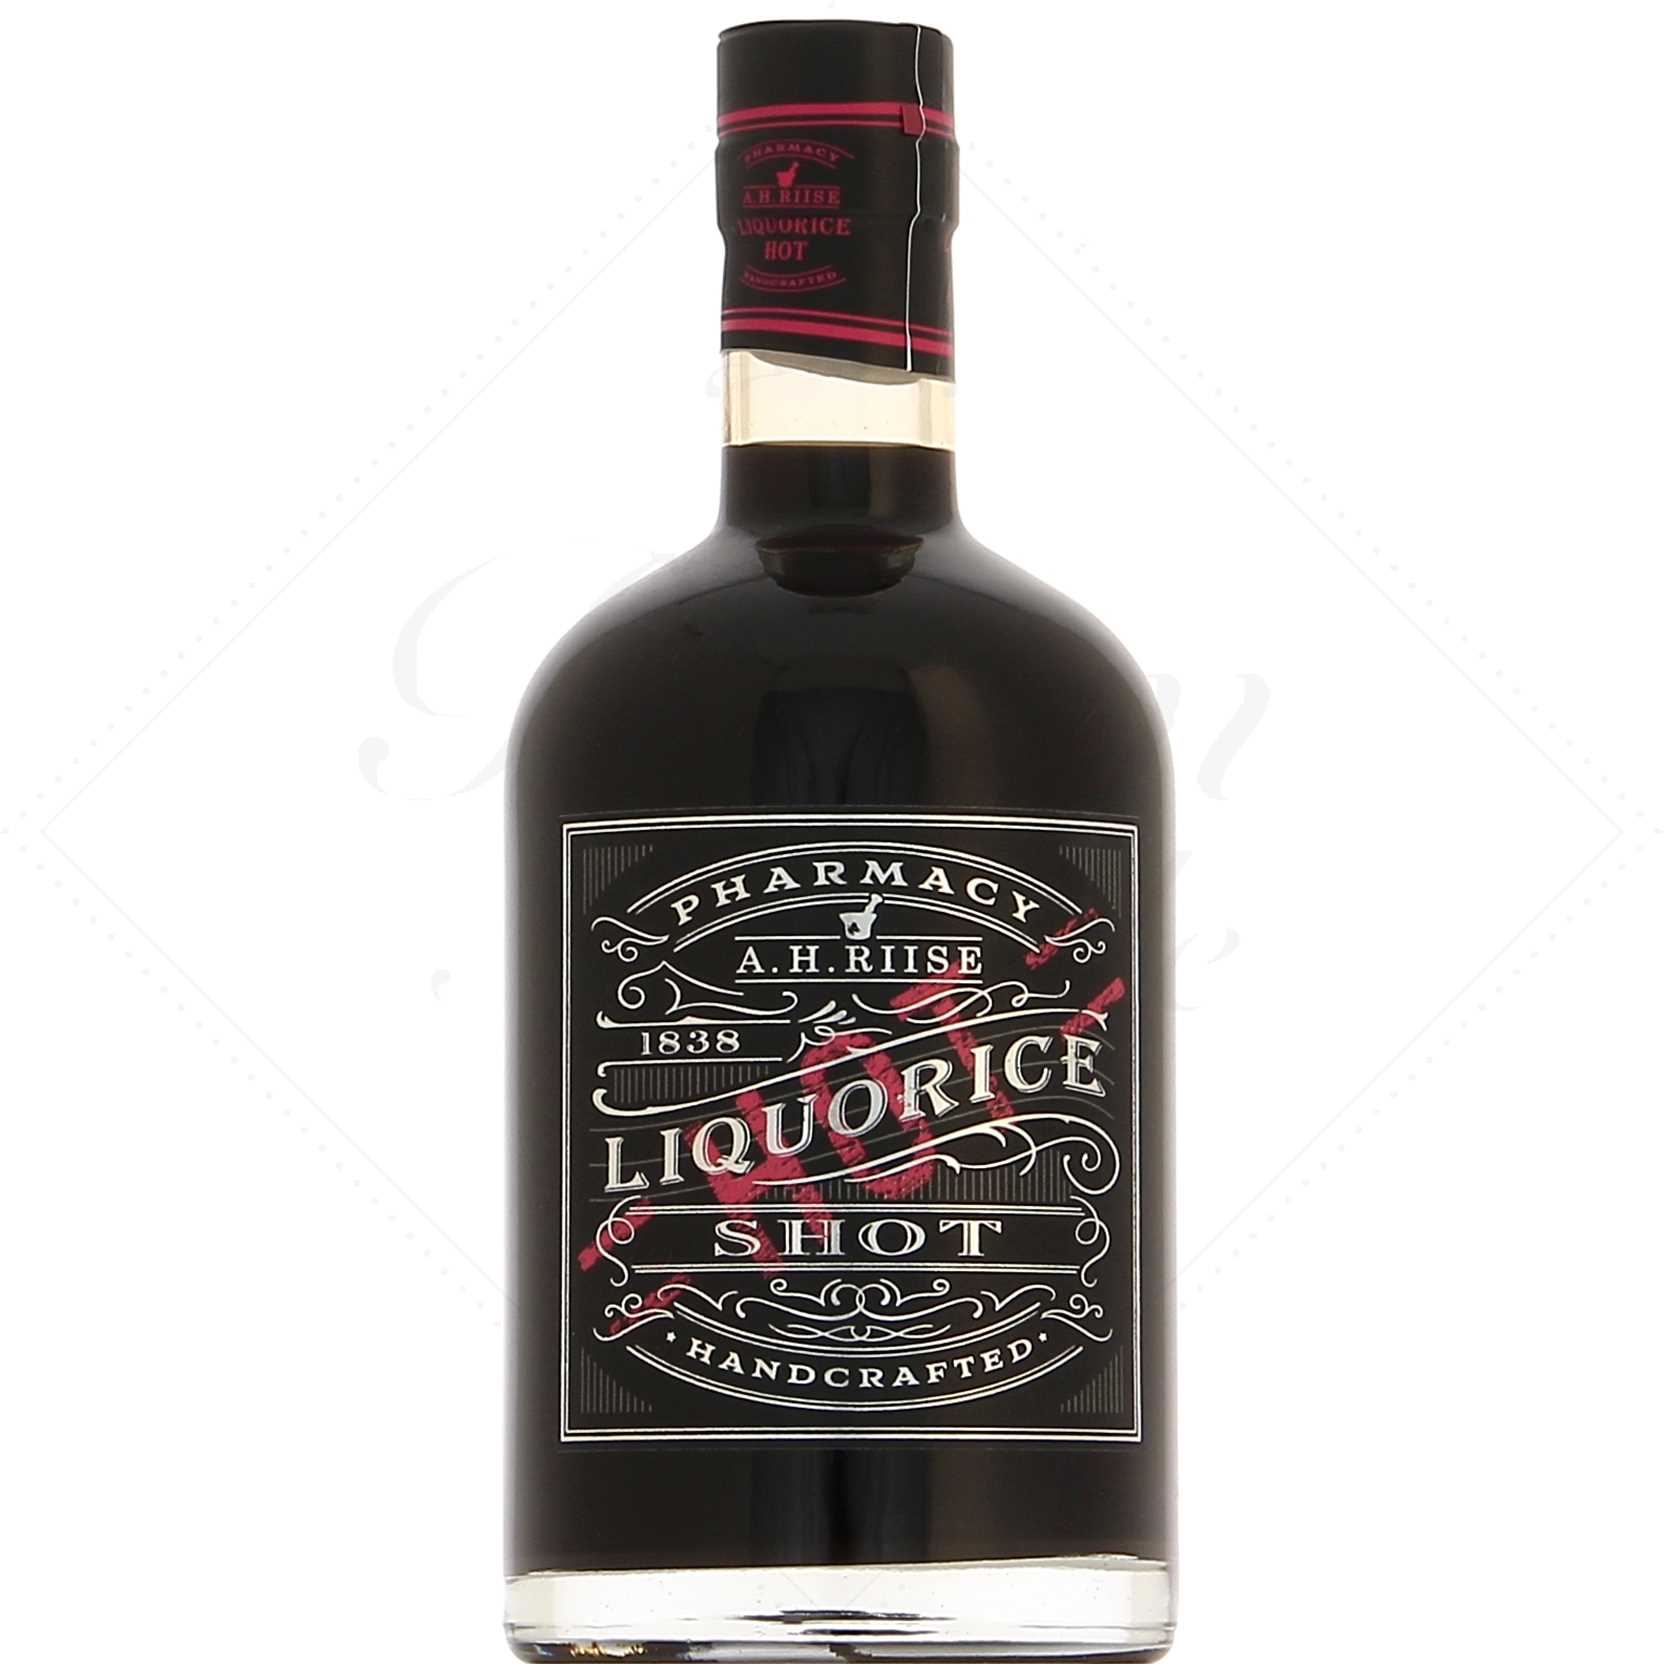 AH Riise Pharmacy - Liquorice Hot Shot 18° - ancienne bouteille